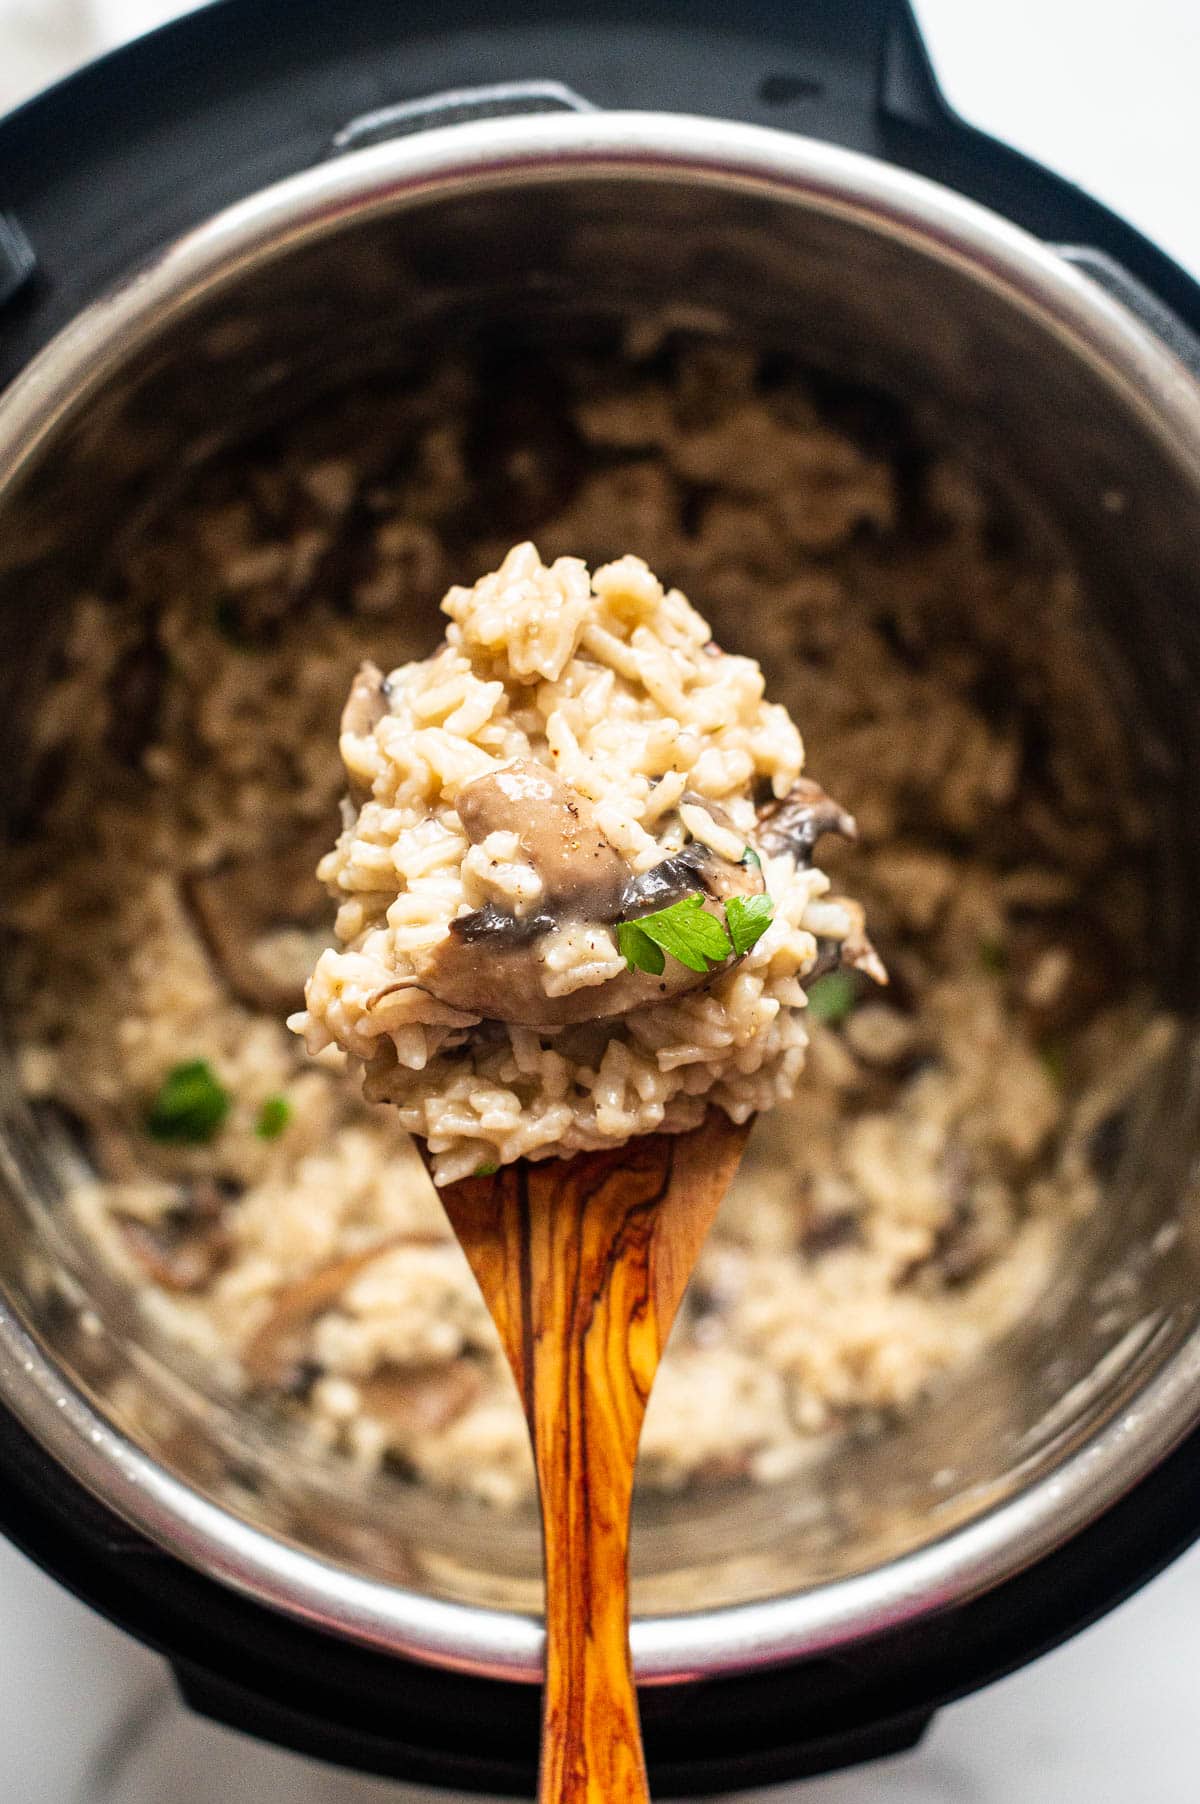 Mushroom risotto on a wooden spoon above the pot.